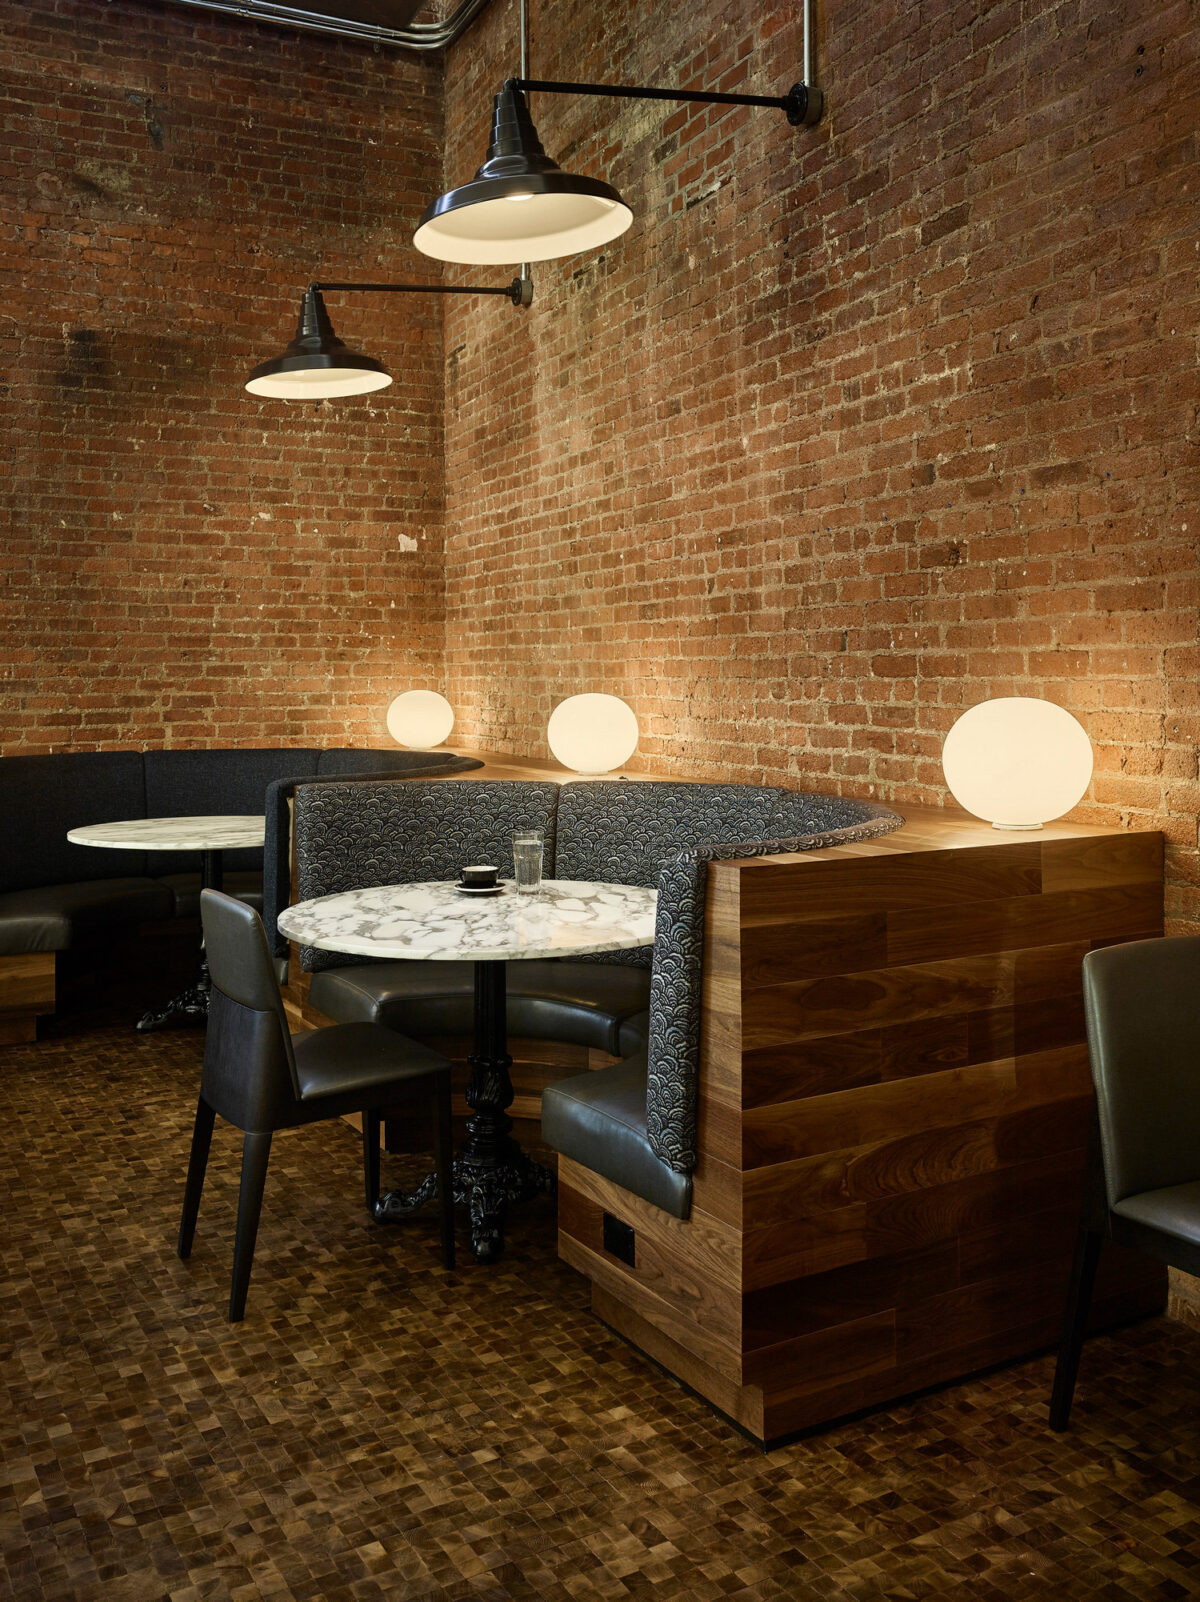 Exposed brick walls complement the warm hardwood flooring in this intimate dining space. Pendant lights cast a soft glow over the marble tabletop, while circular wall sconces add ambient lighting. Two-tone upholstered booths combine comfort with a modern, sleek design aesthetic.